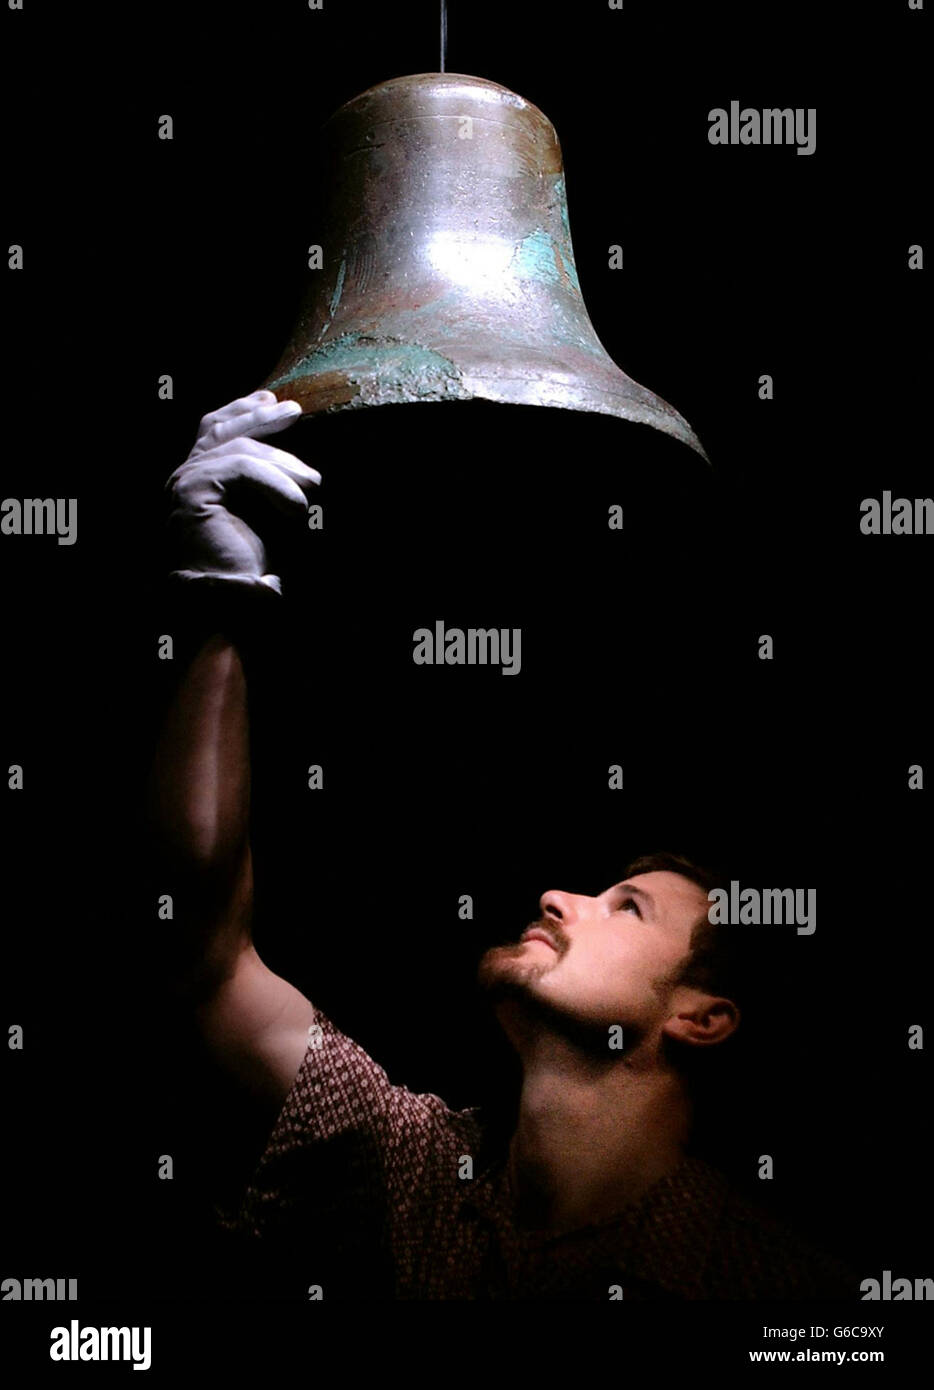 Tom Zaller, production manager of the Titanic Artifact Exhibition at the Science Museum in west London, puts up the bell from the crows nest of the Titanic. The ship's bell, rung moments before the liner struck an iceberg, *..and is part of the exhibition which opens to the public on May 16. Stock Photo